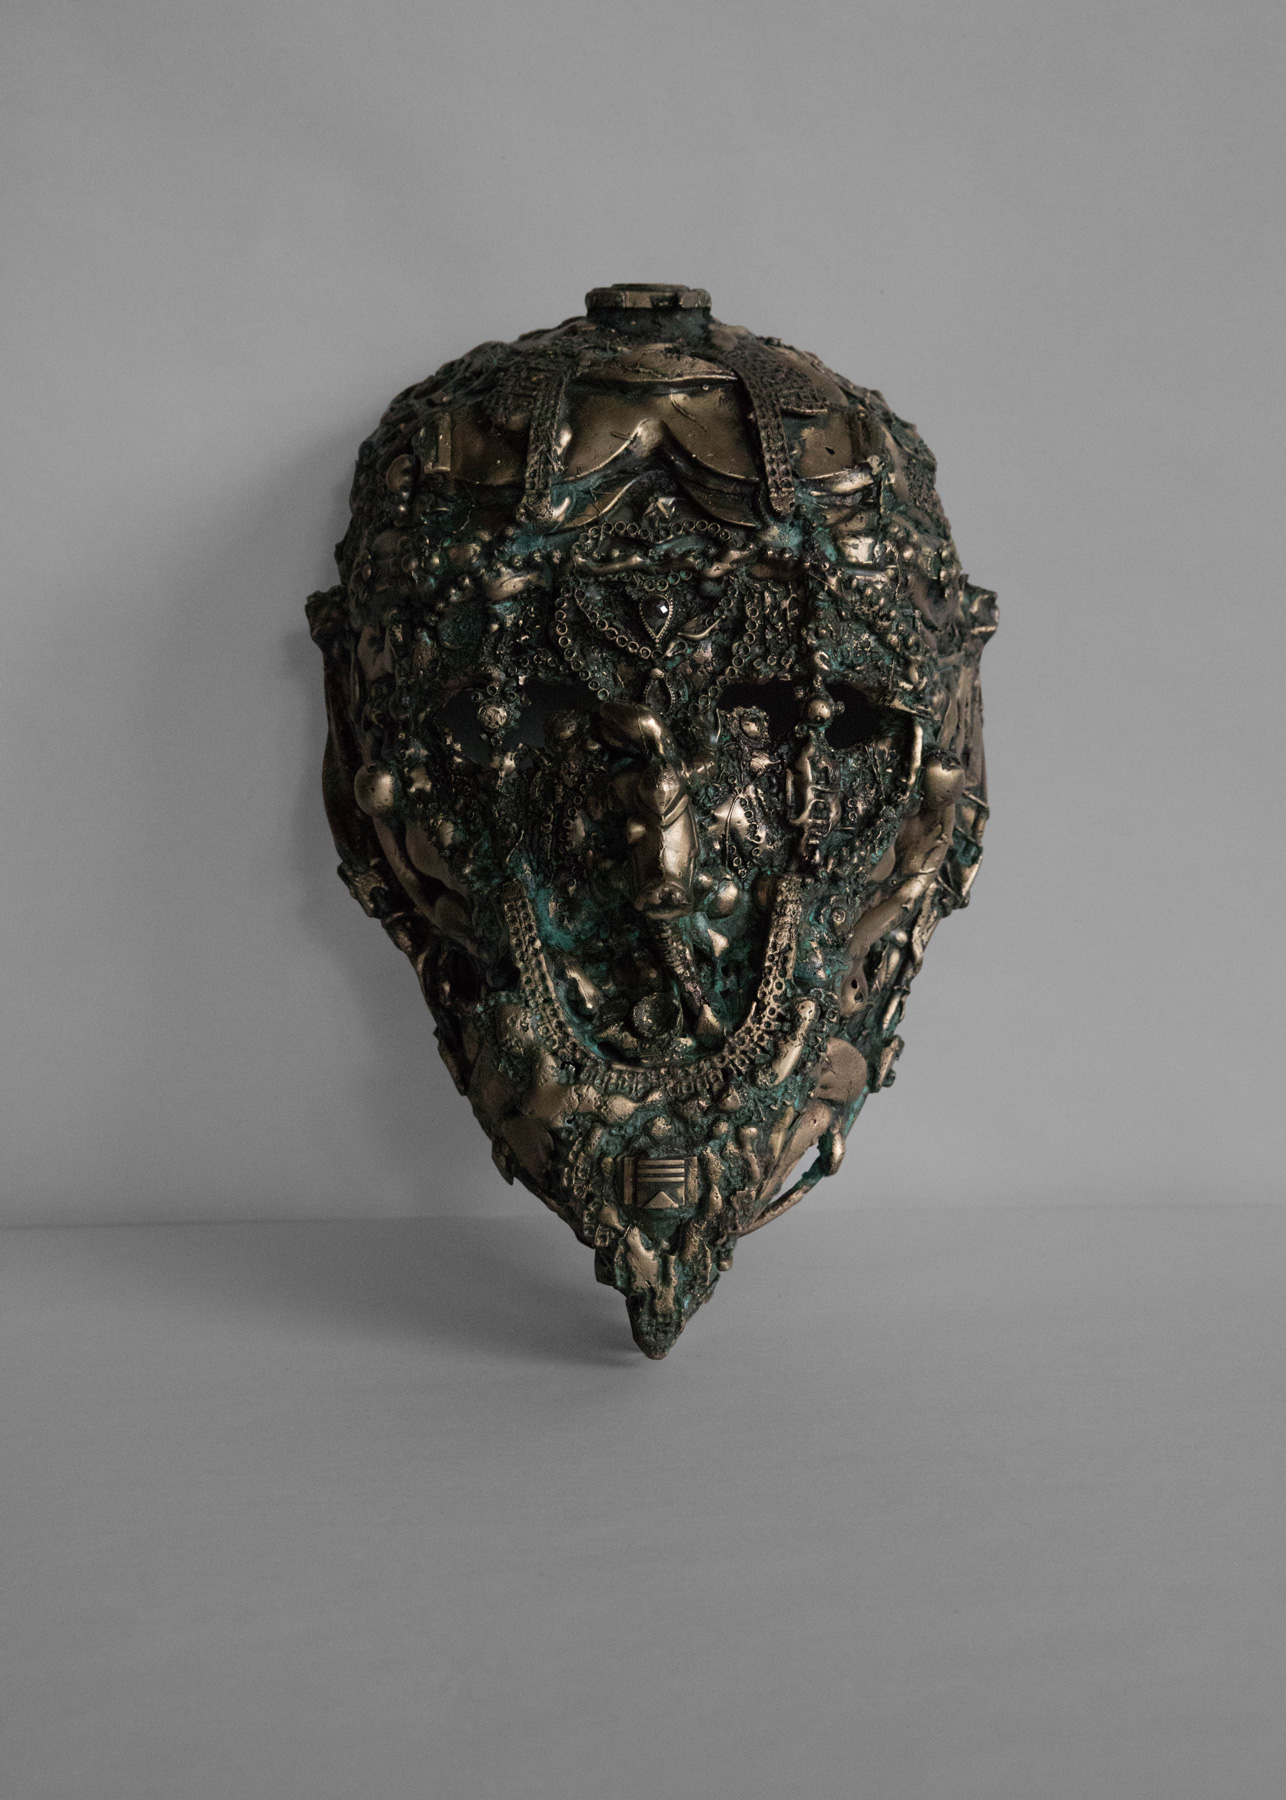 ‘Death Mask for The Equation' made by Fred Fowler from bronze.